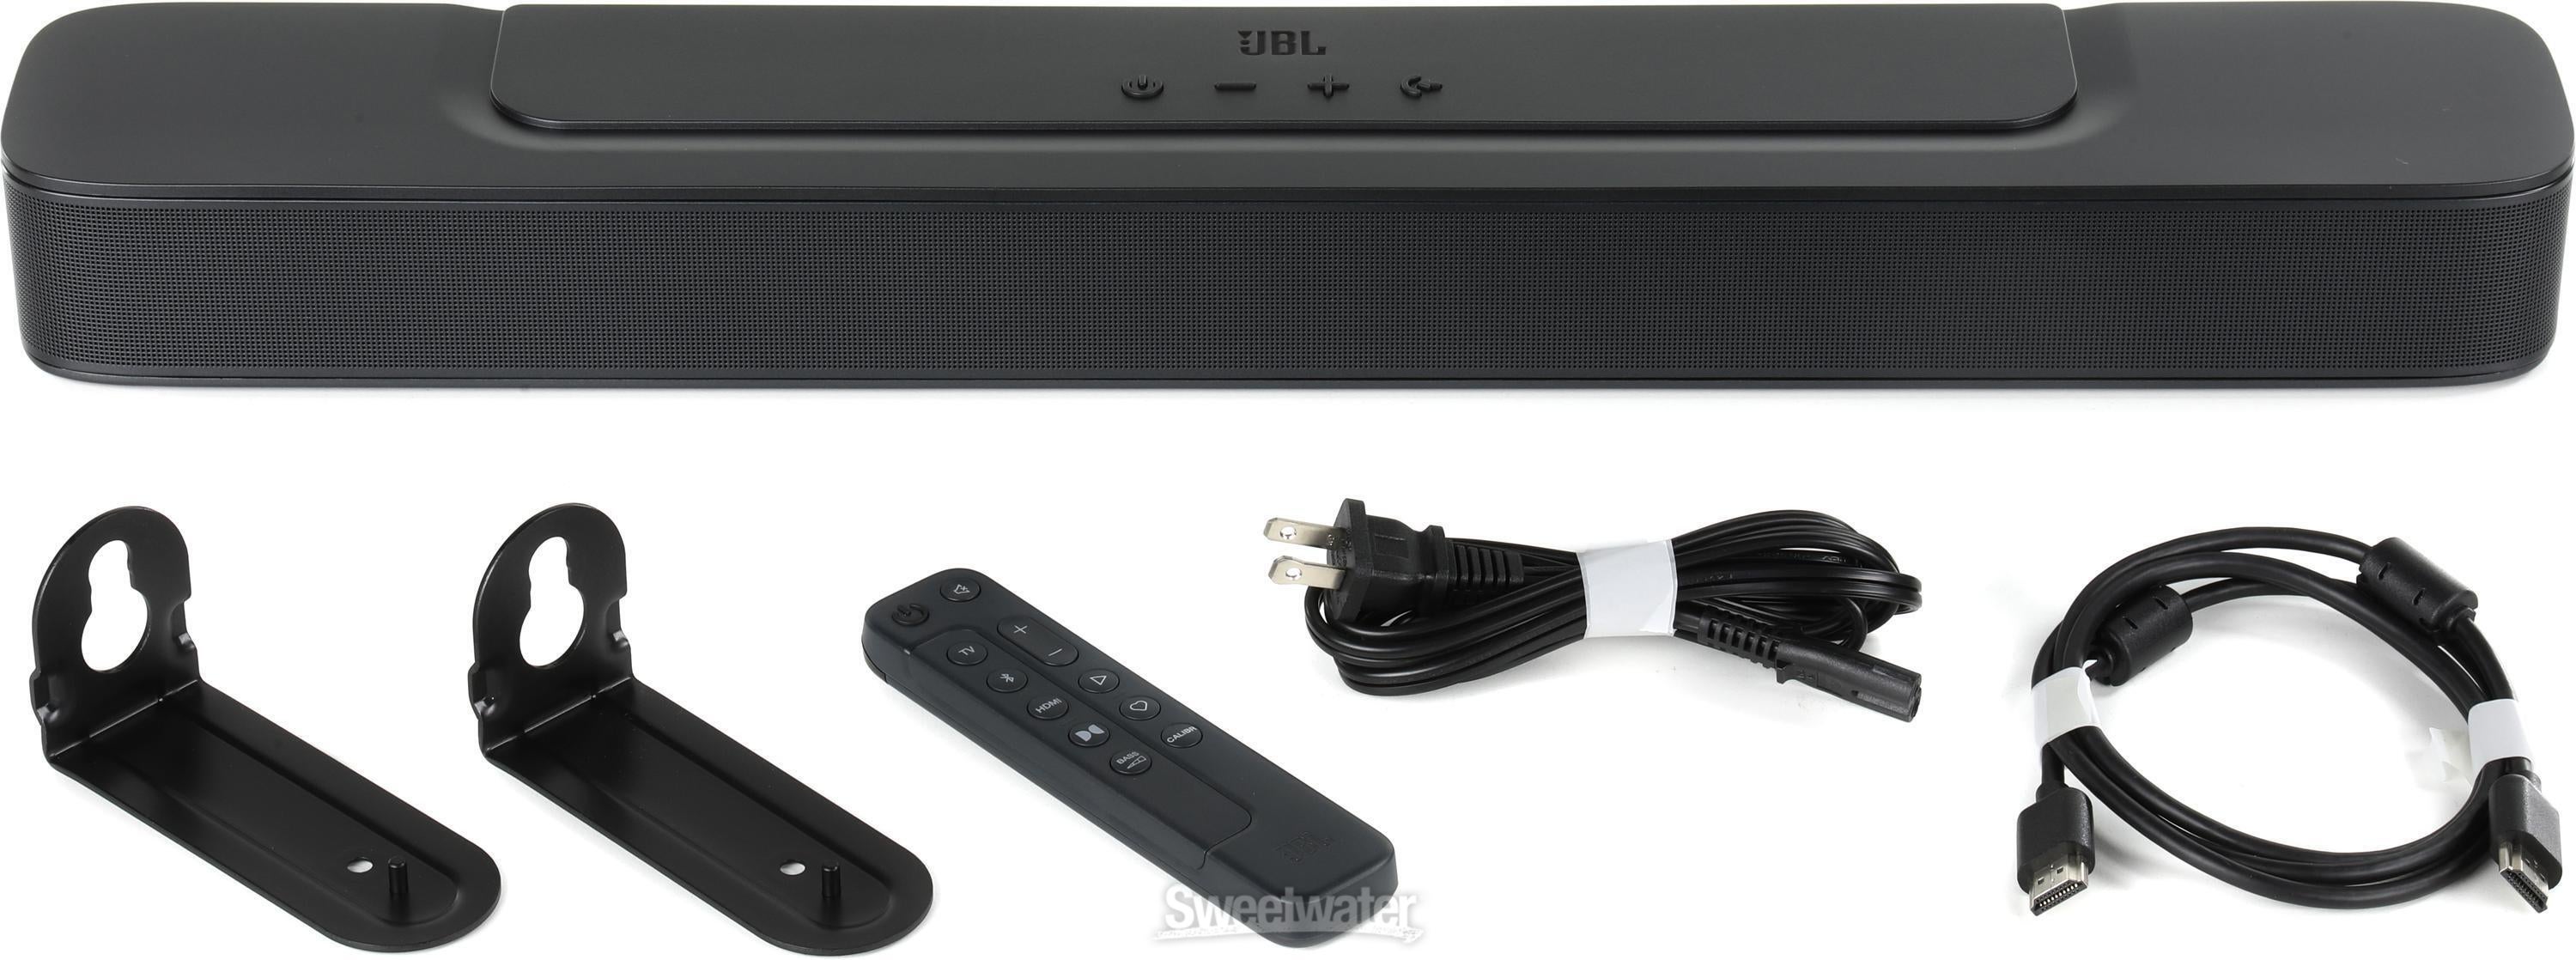 JBL Bar 2.0 All-in-One MK2 - Black Reviews | Sweetwater